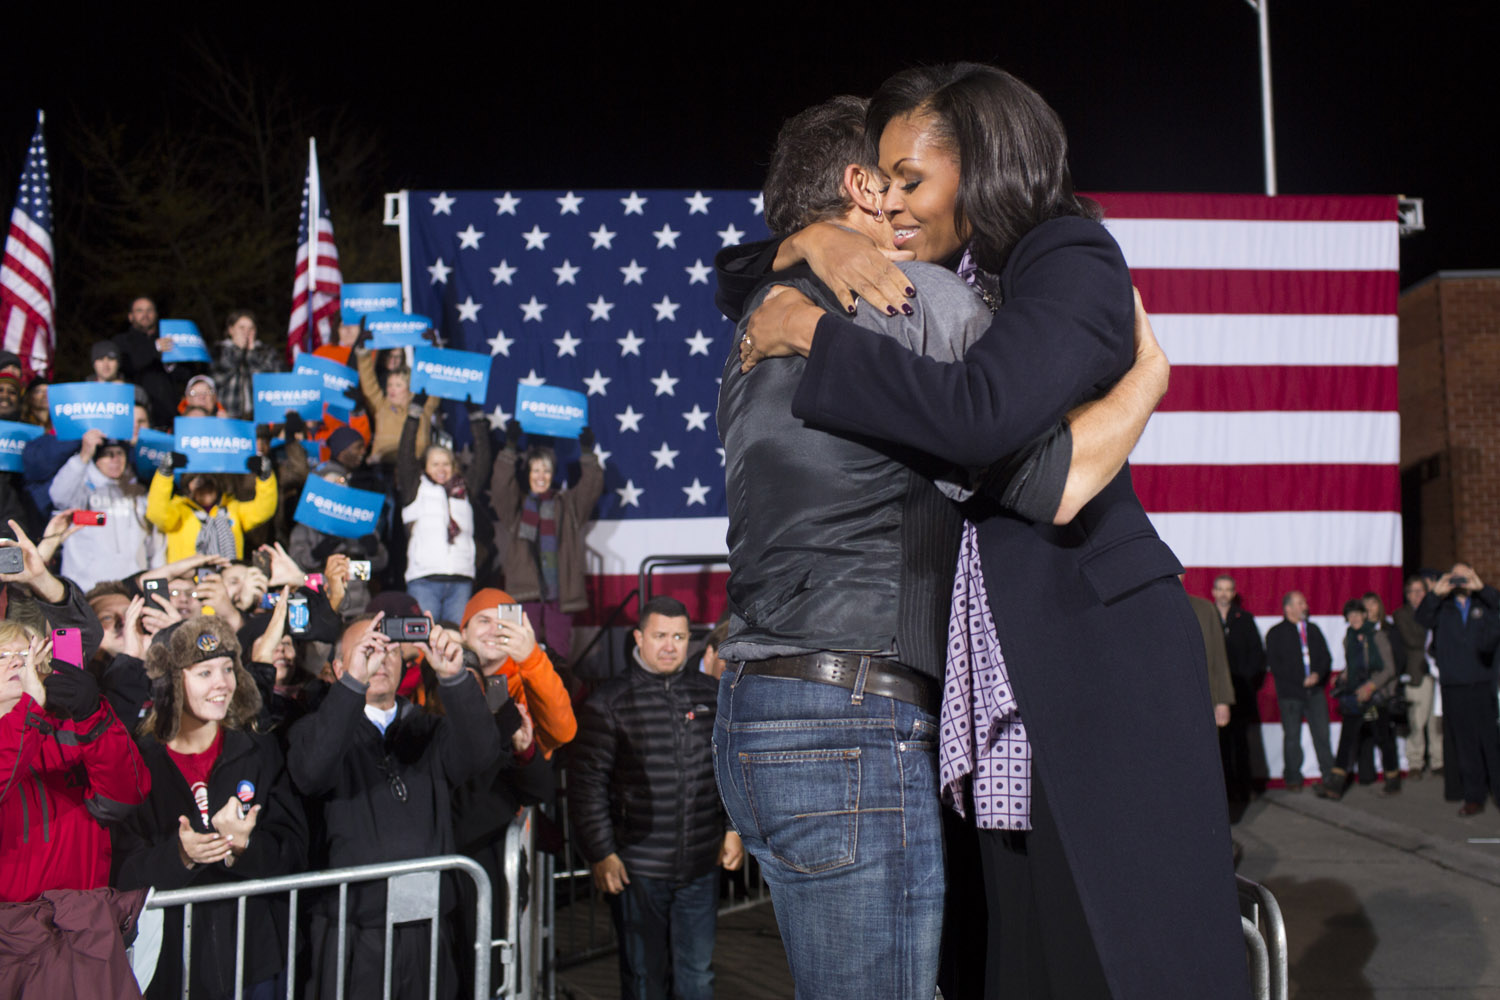 Nov. 5, 2012. Musician Bruce Springsteen greets the First Lady after performing in Des Moines, Iowa.